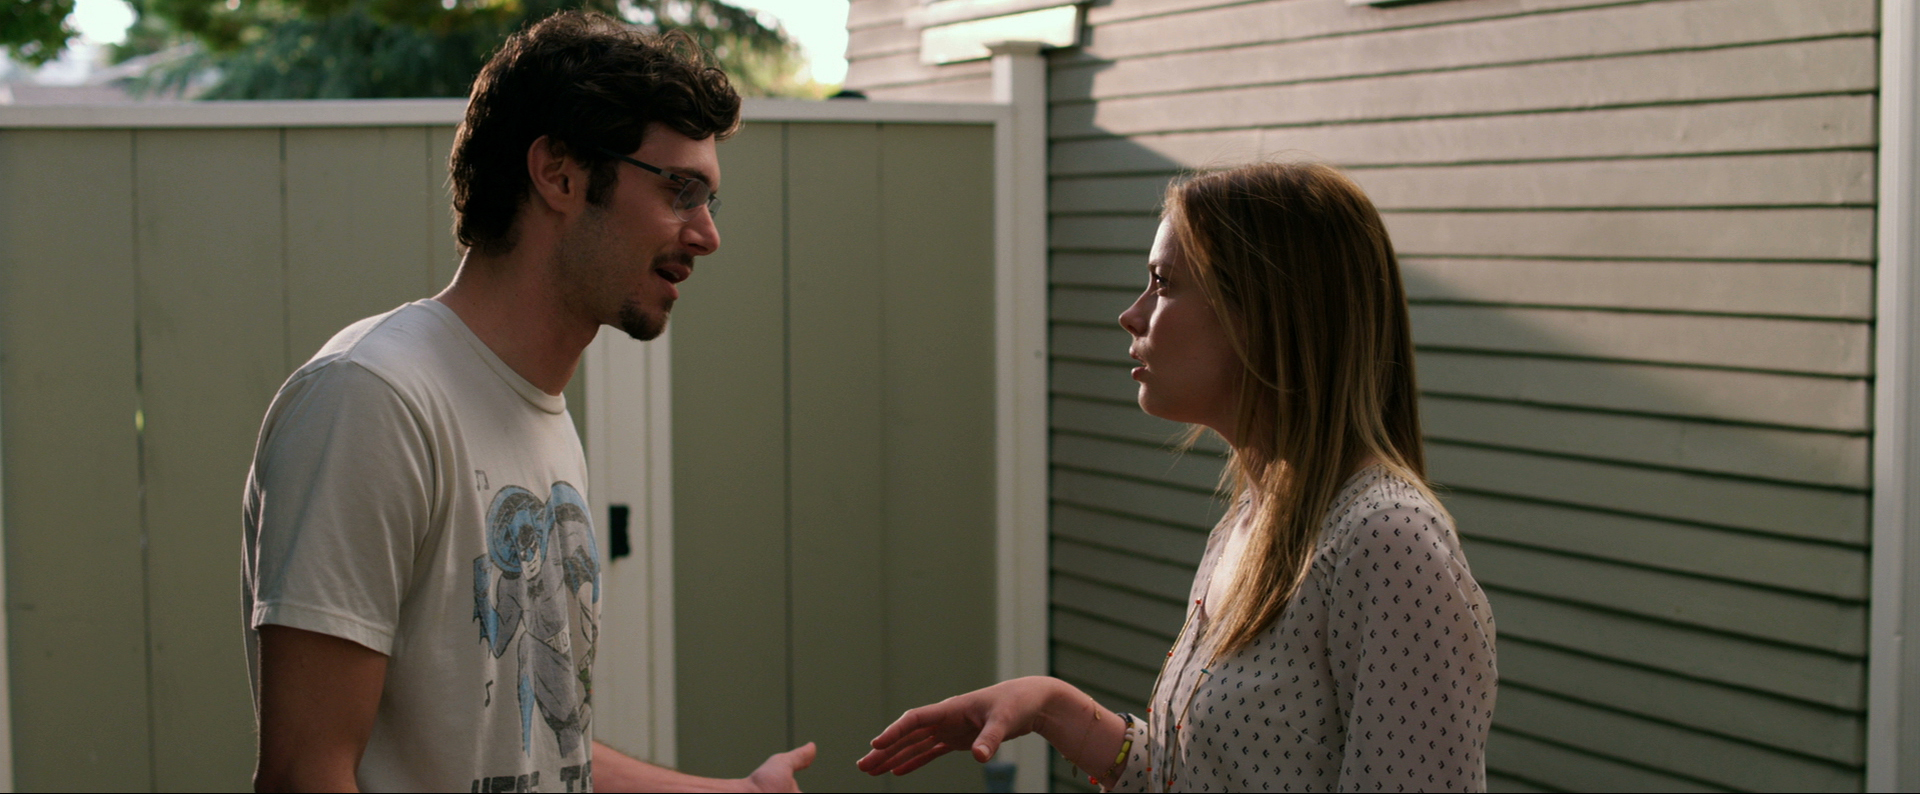 Still of Adam Brody and Gillian Jacobs in Life Partners (2014)